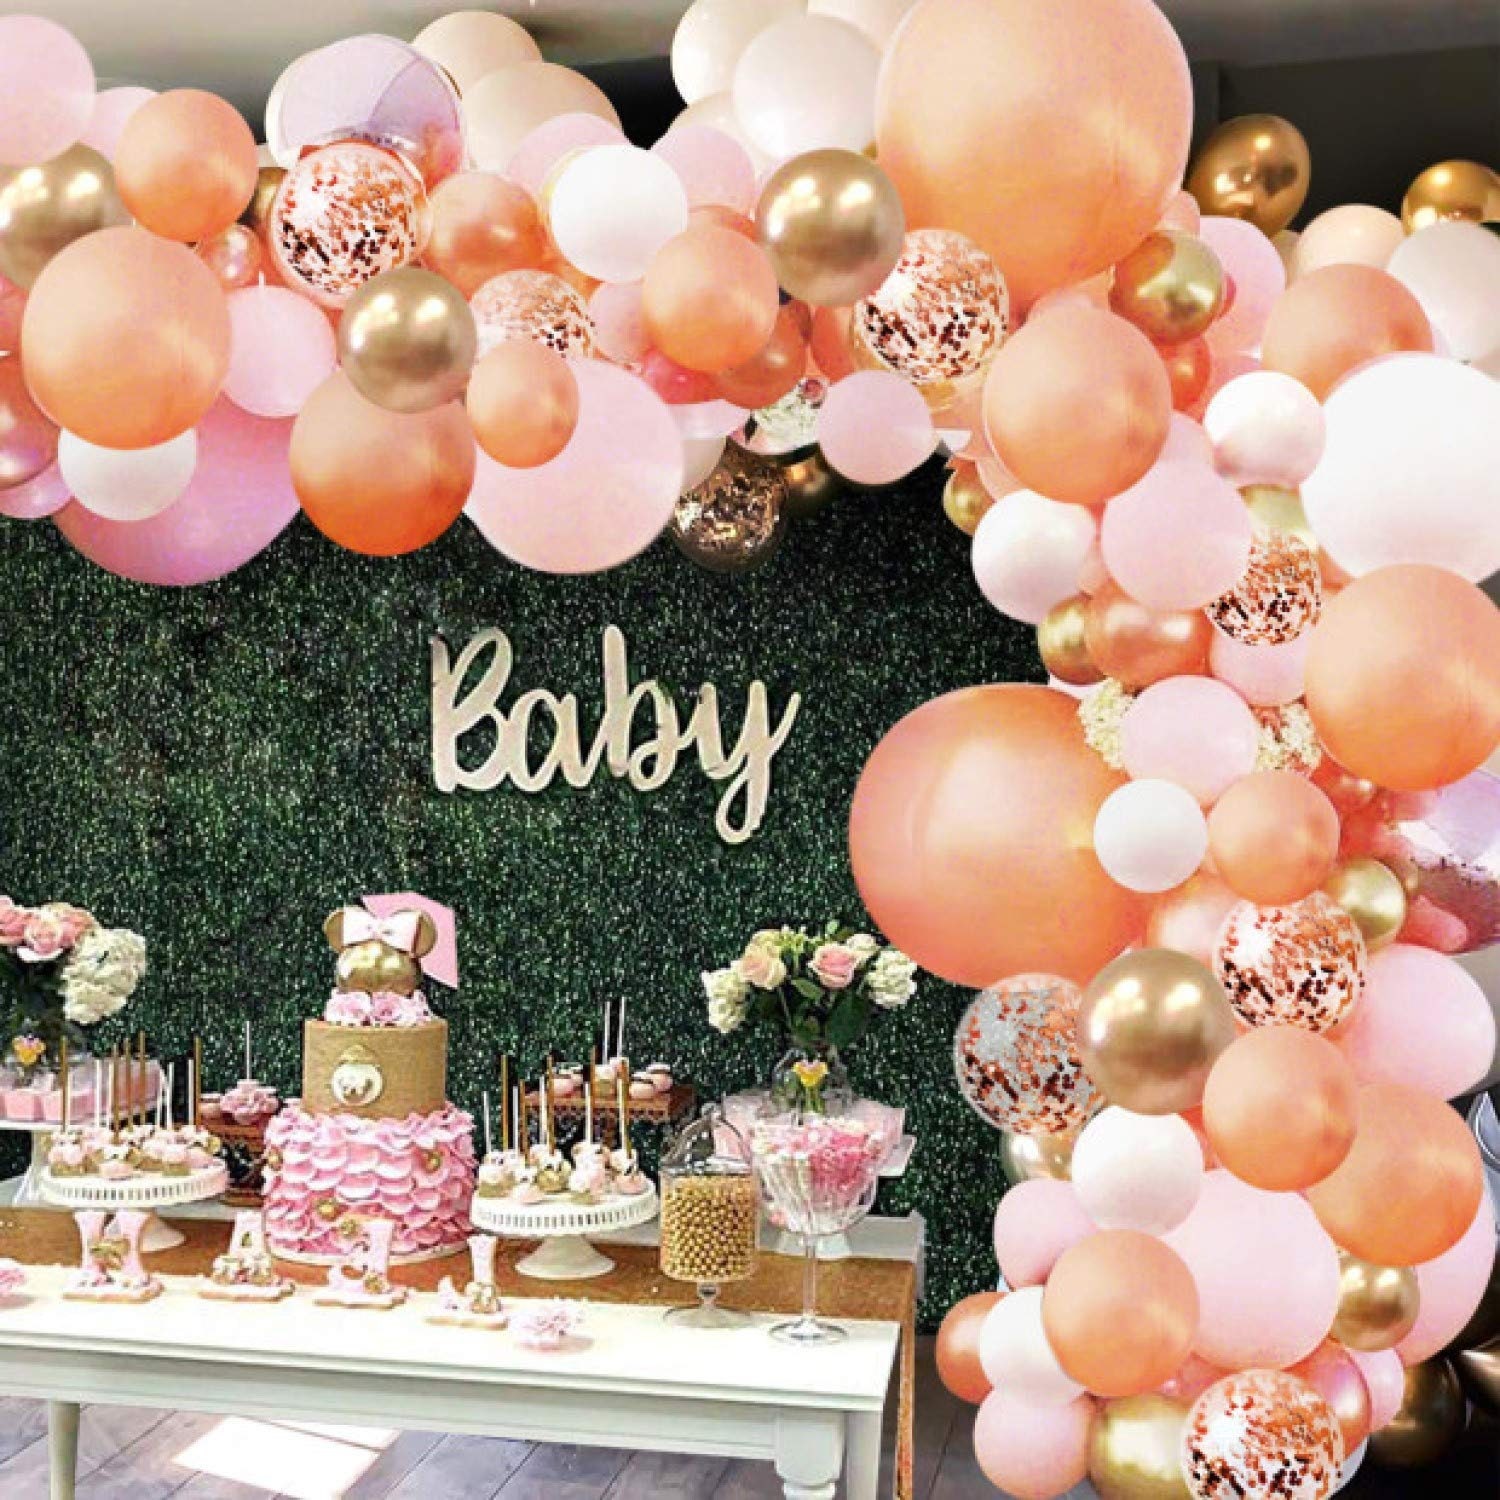 Balloon Decoration For Baby Shower At Home - Best Design Idea